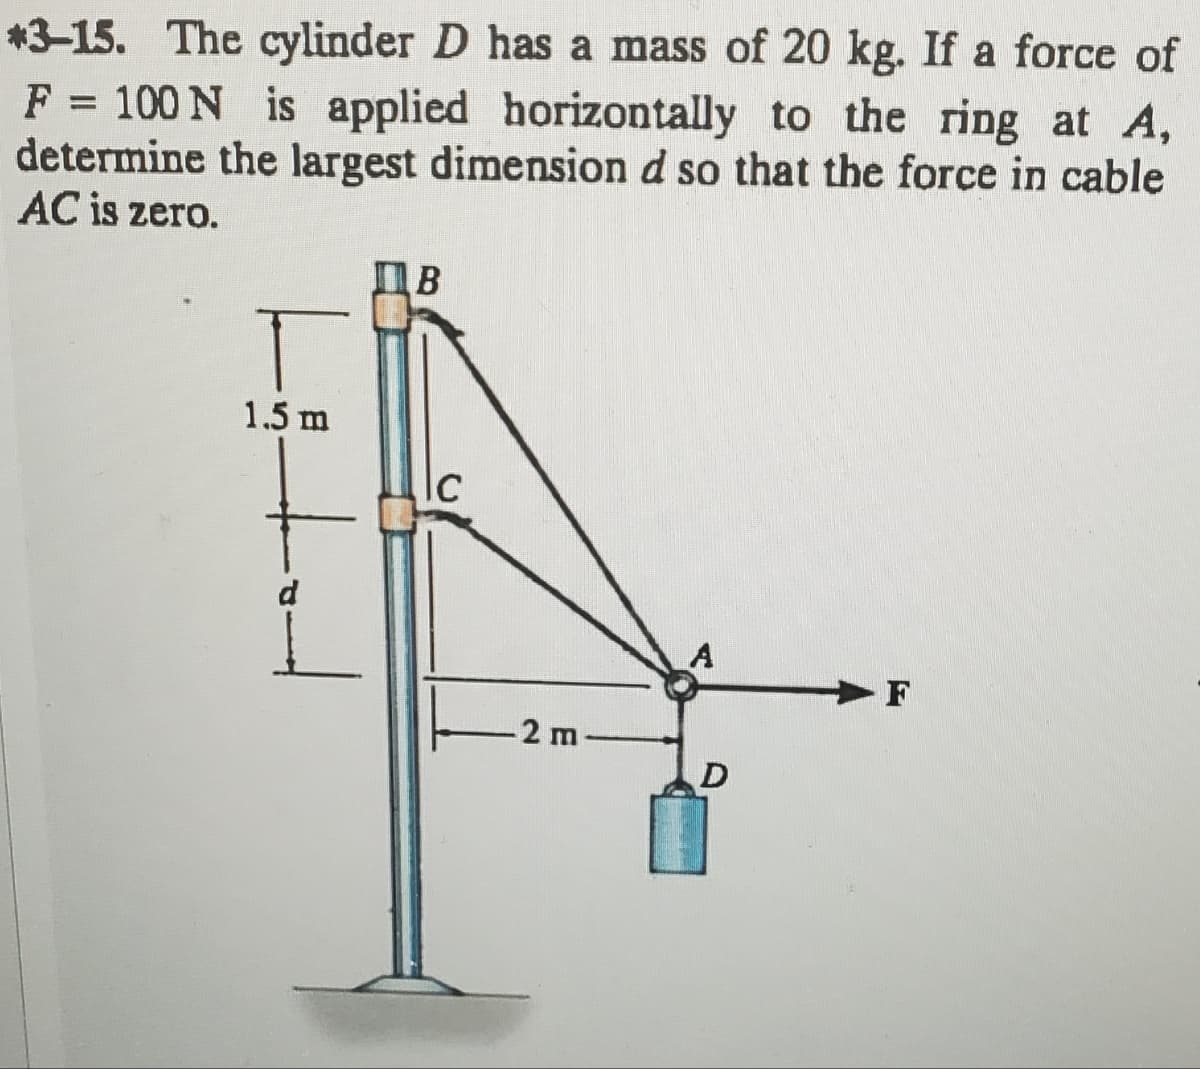 *3-15. The cylinder D has a mass of 20 kg. If a force of
F = 100 N is applied horizontally to the ring at A,
determine the largest dimension d so that the force in cable
AC is zero.
B
T
1.5 m
+
C
Ic
2 m
A
F